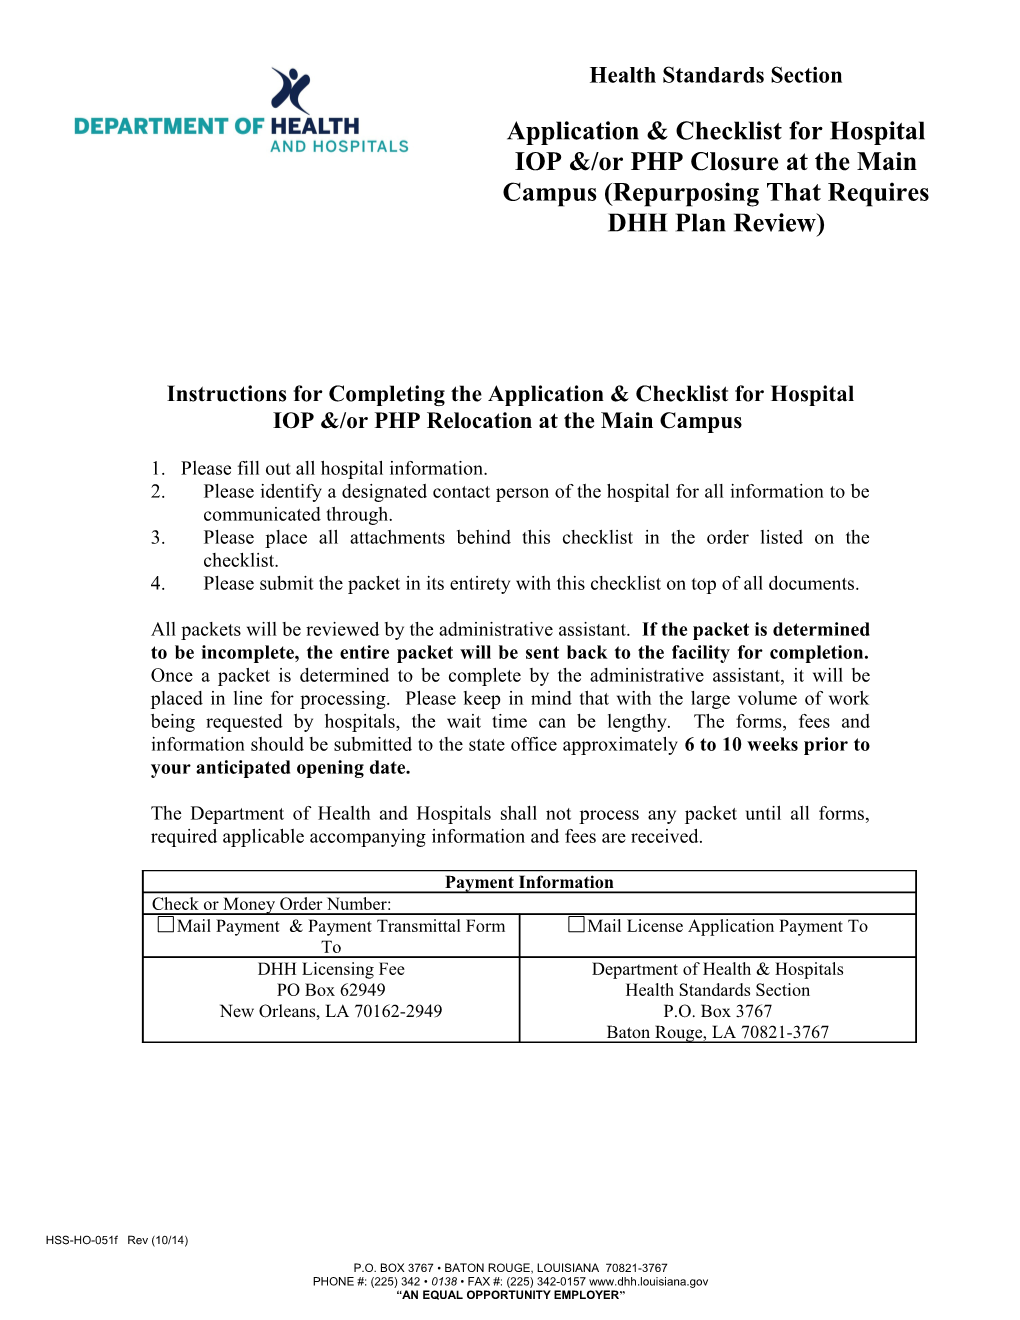 Instructions for Completing the Application & Checklist for Hospital IOP &/Or PHP Relocation